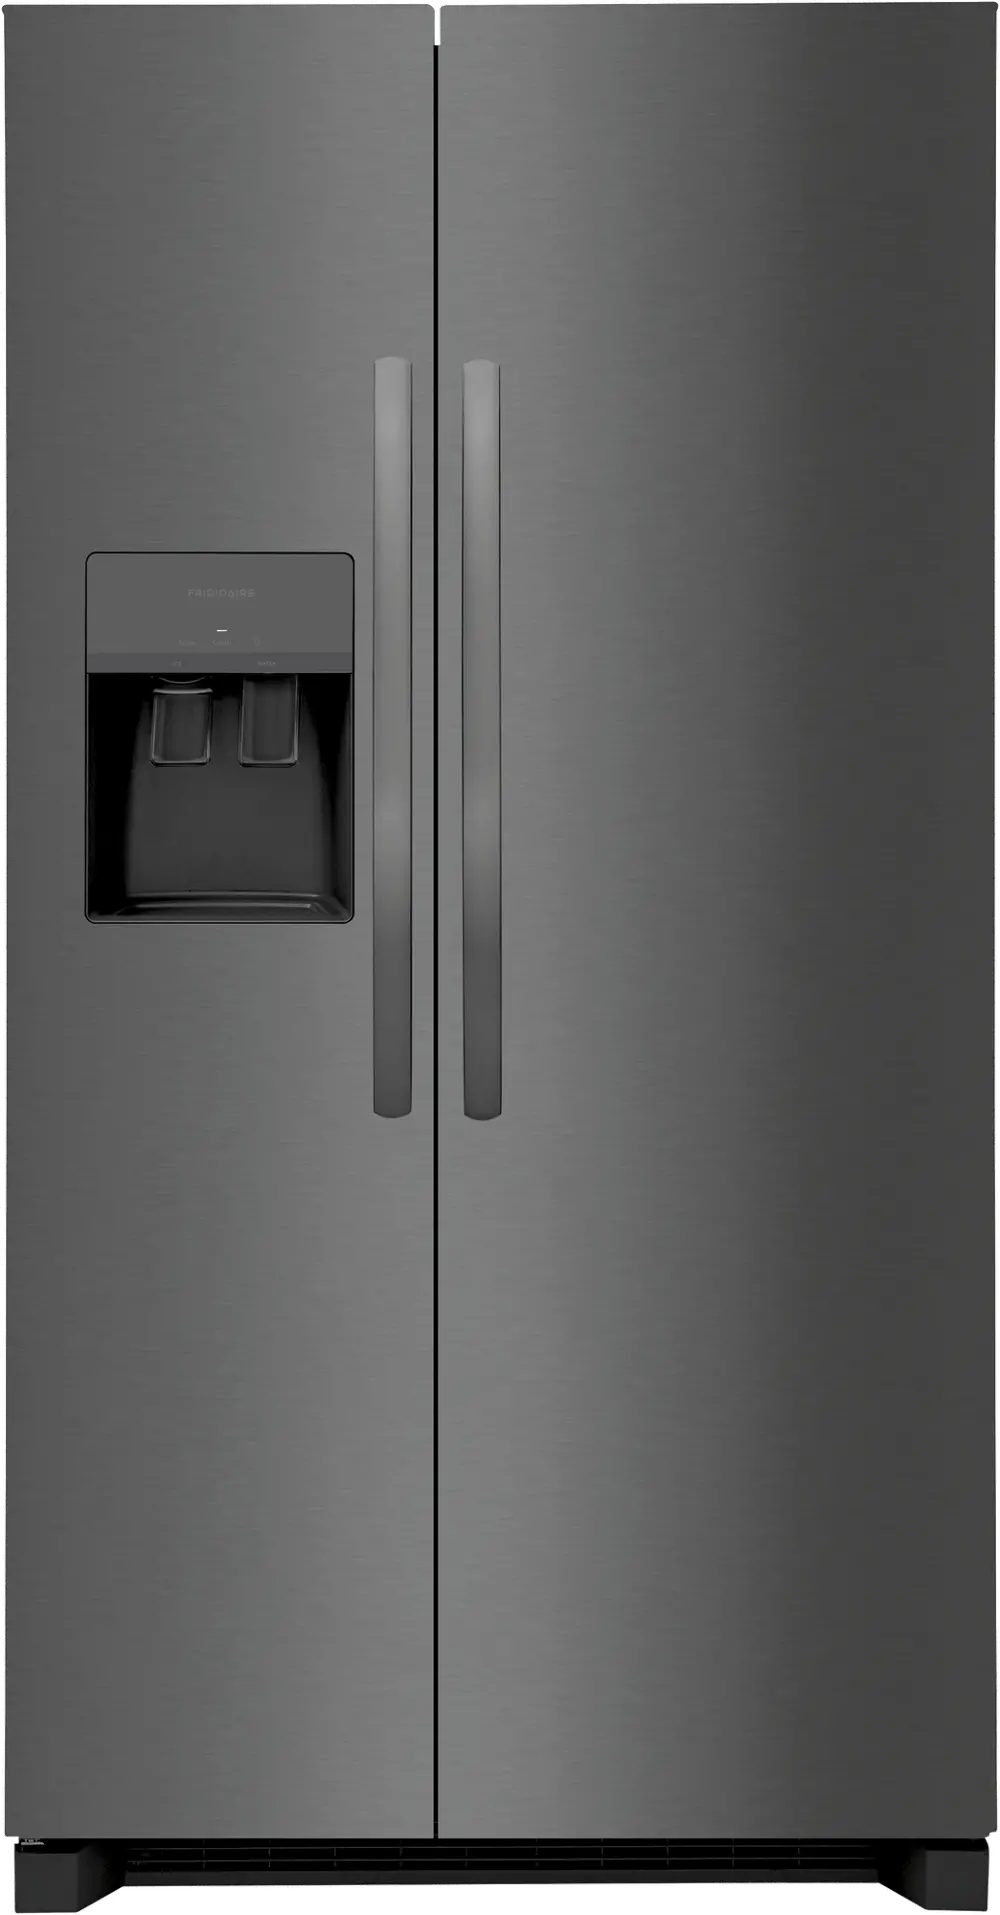 FRSS2623AD Frigidaire 25.6 cu ft Side by Side Refrigerator - Black Stainless Steel-1